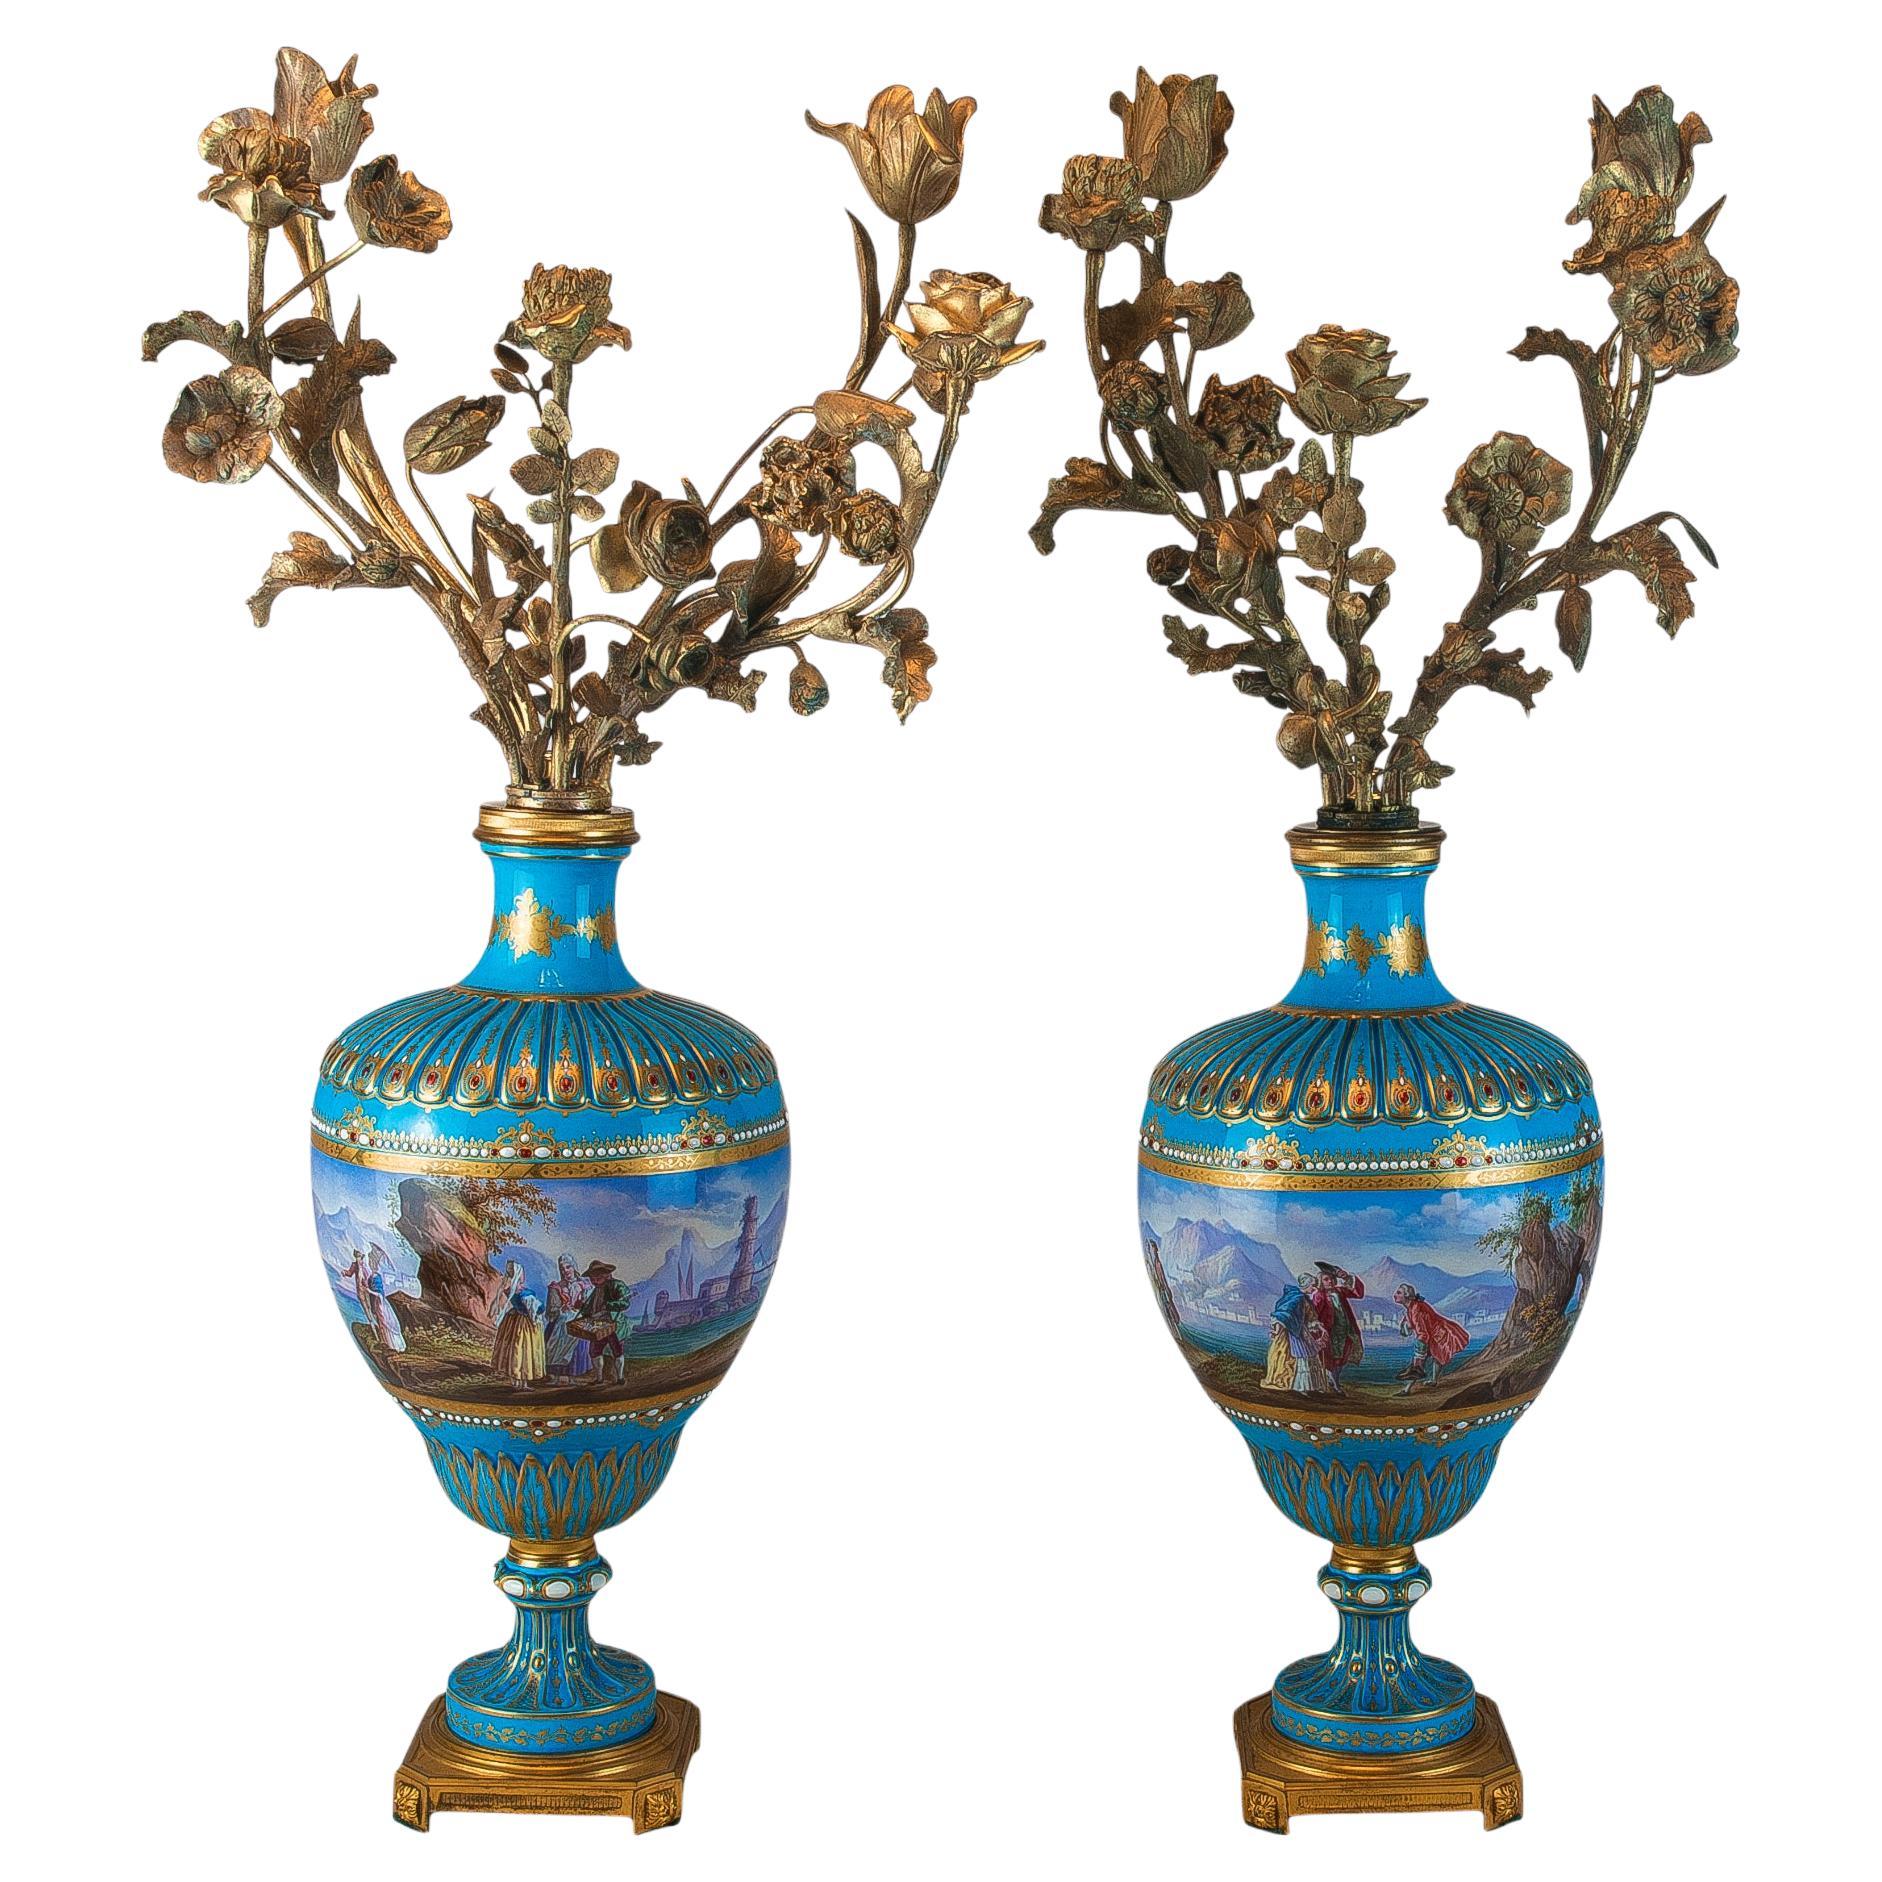 Pair of Jeweled Turquoise Hand Painted Porcelain Sèvres Candelabras